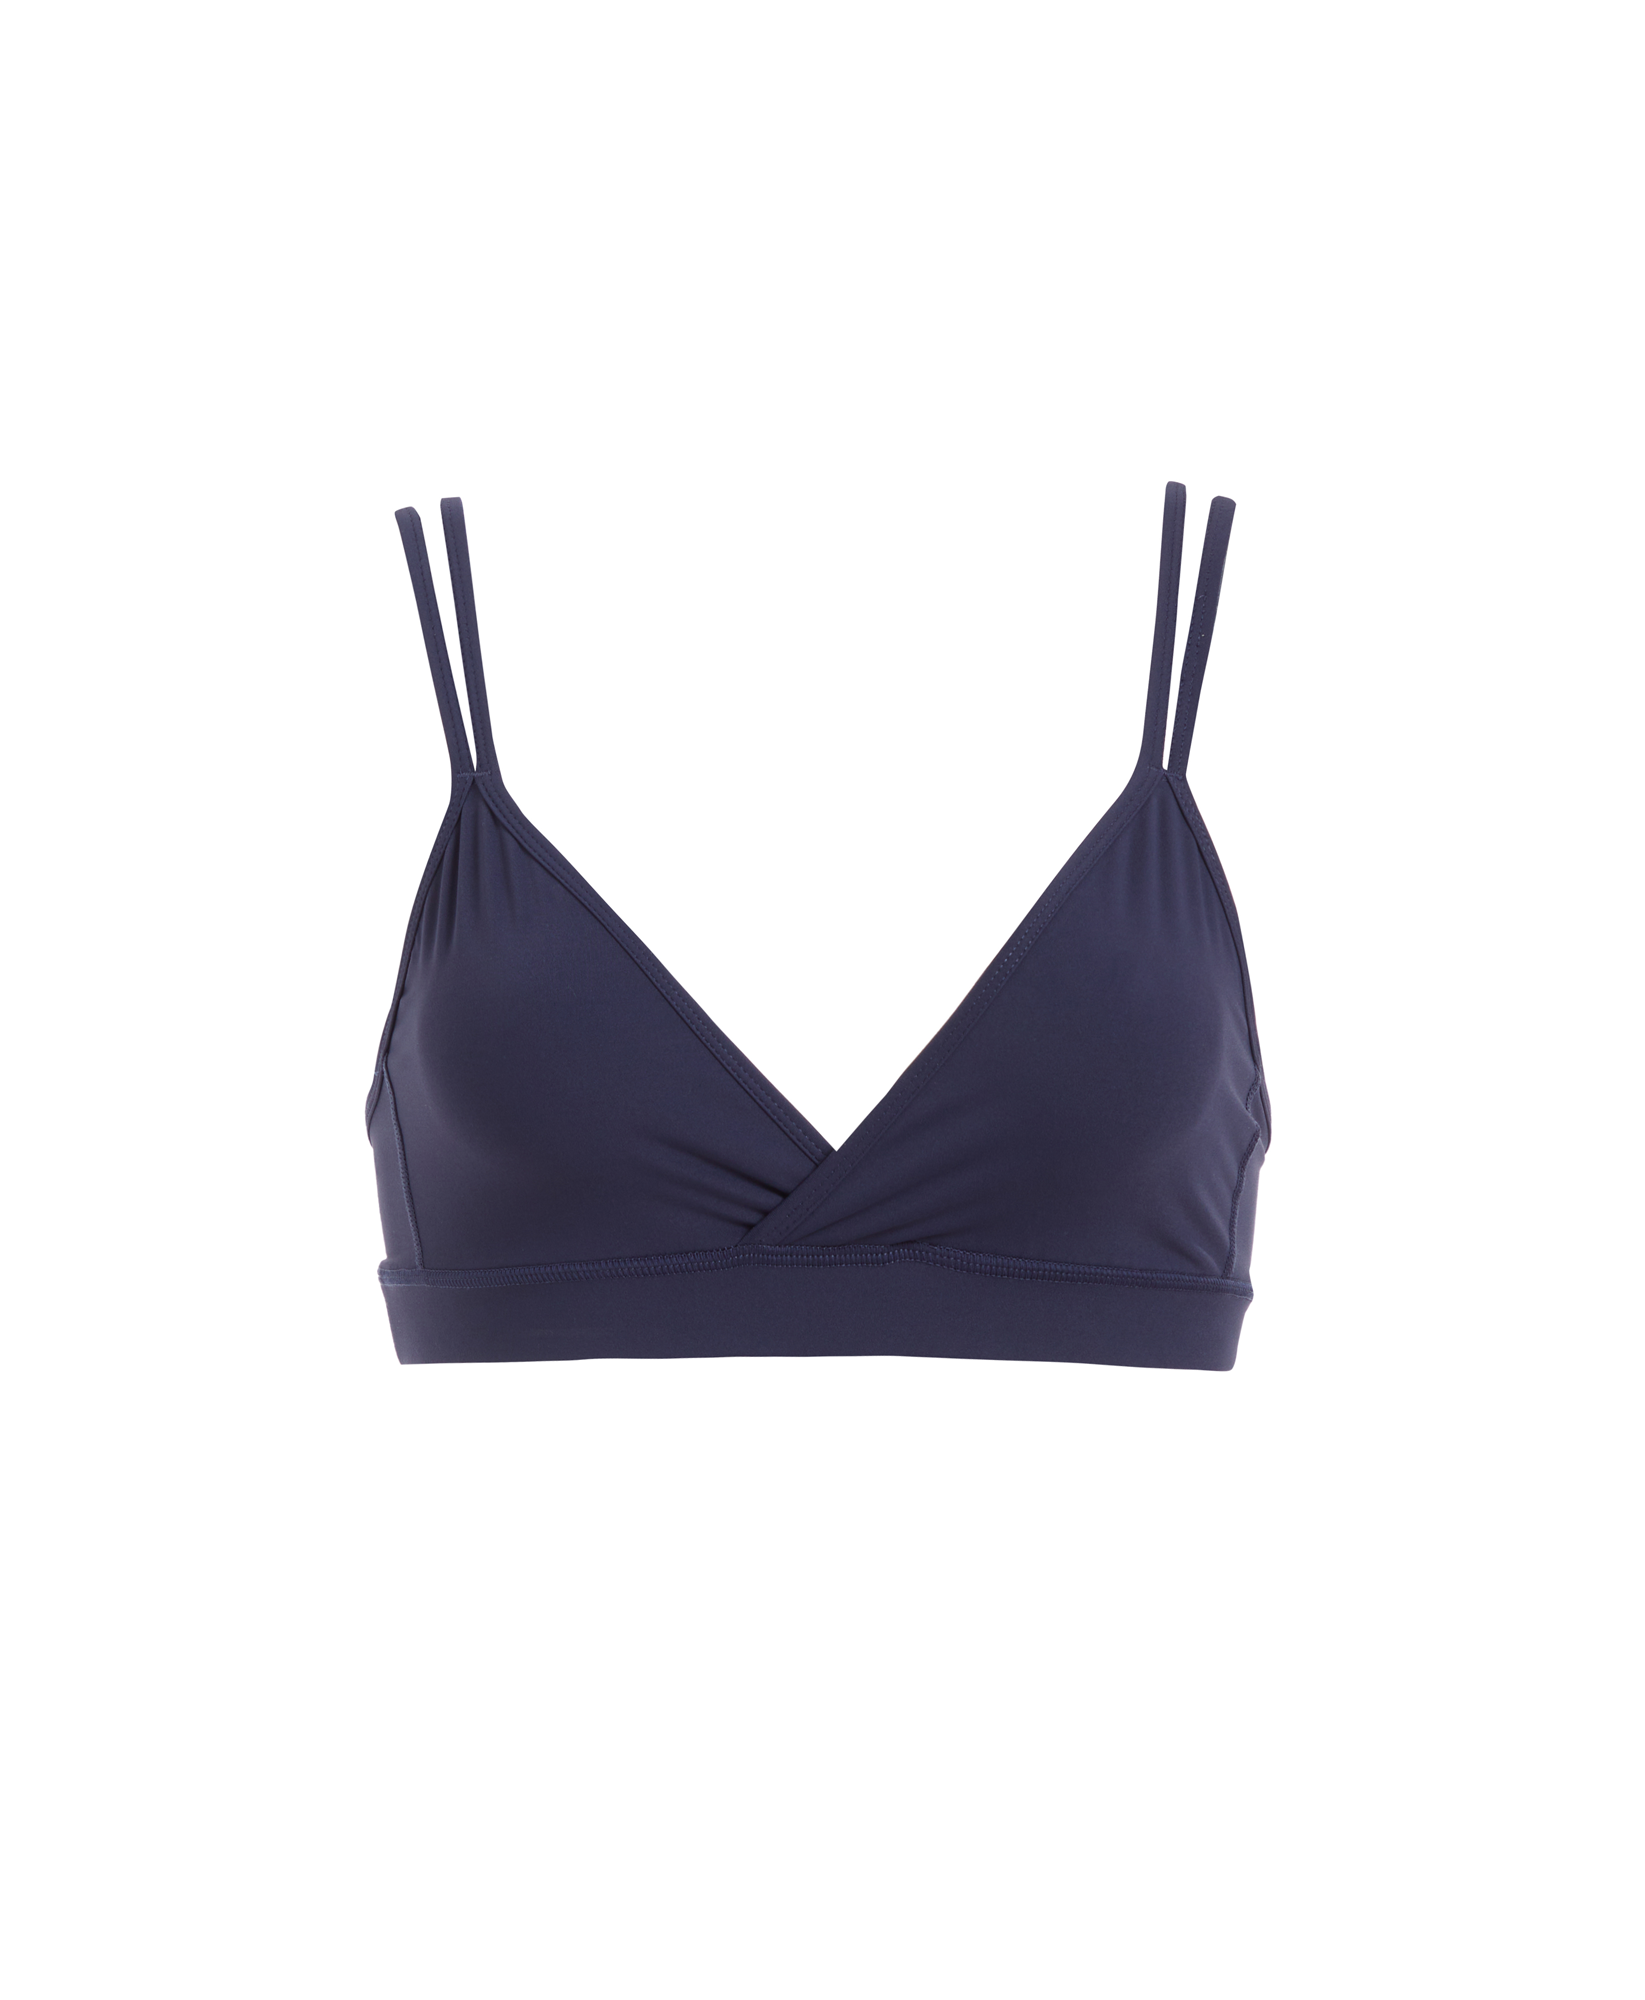 Wear One's At Groove Bra in navy on ghost mannequin front view